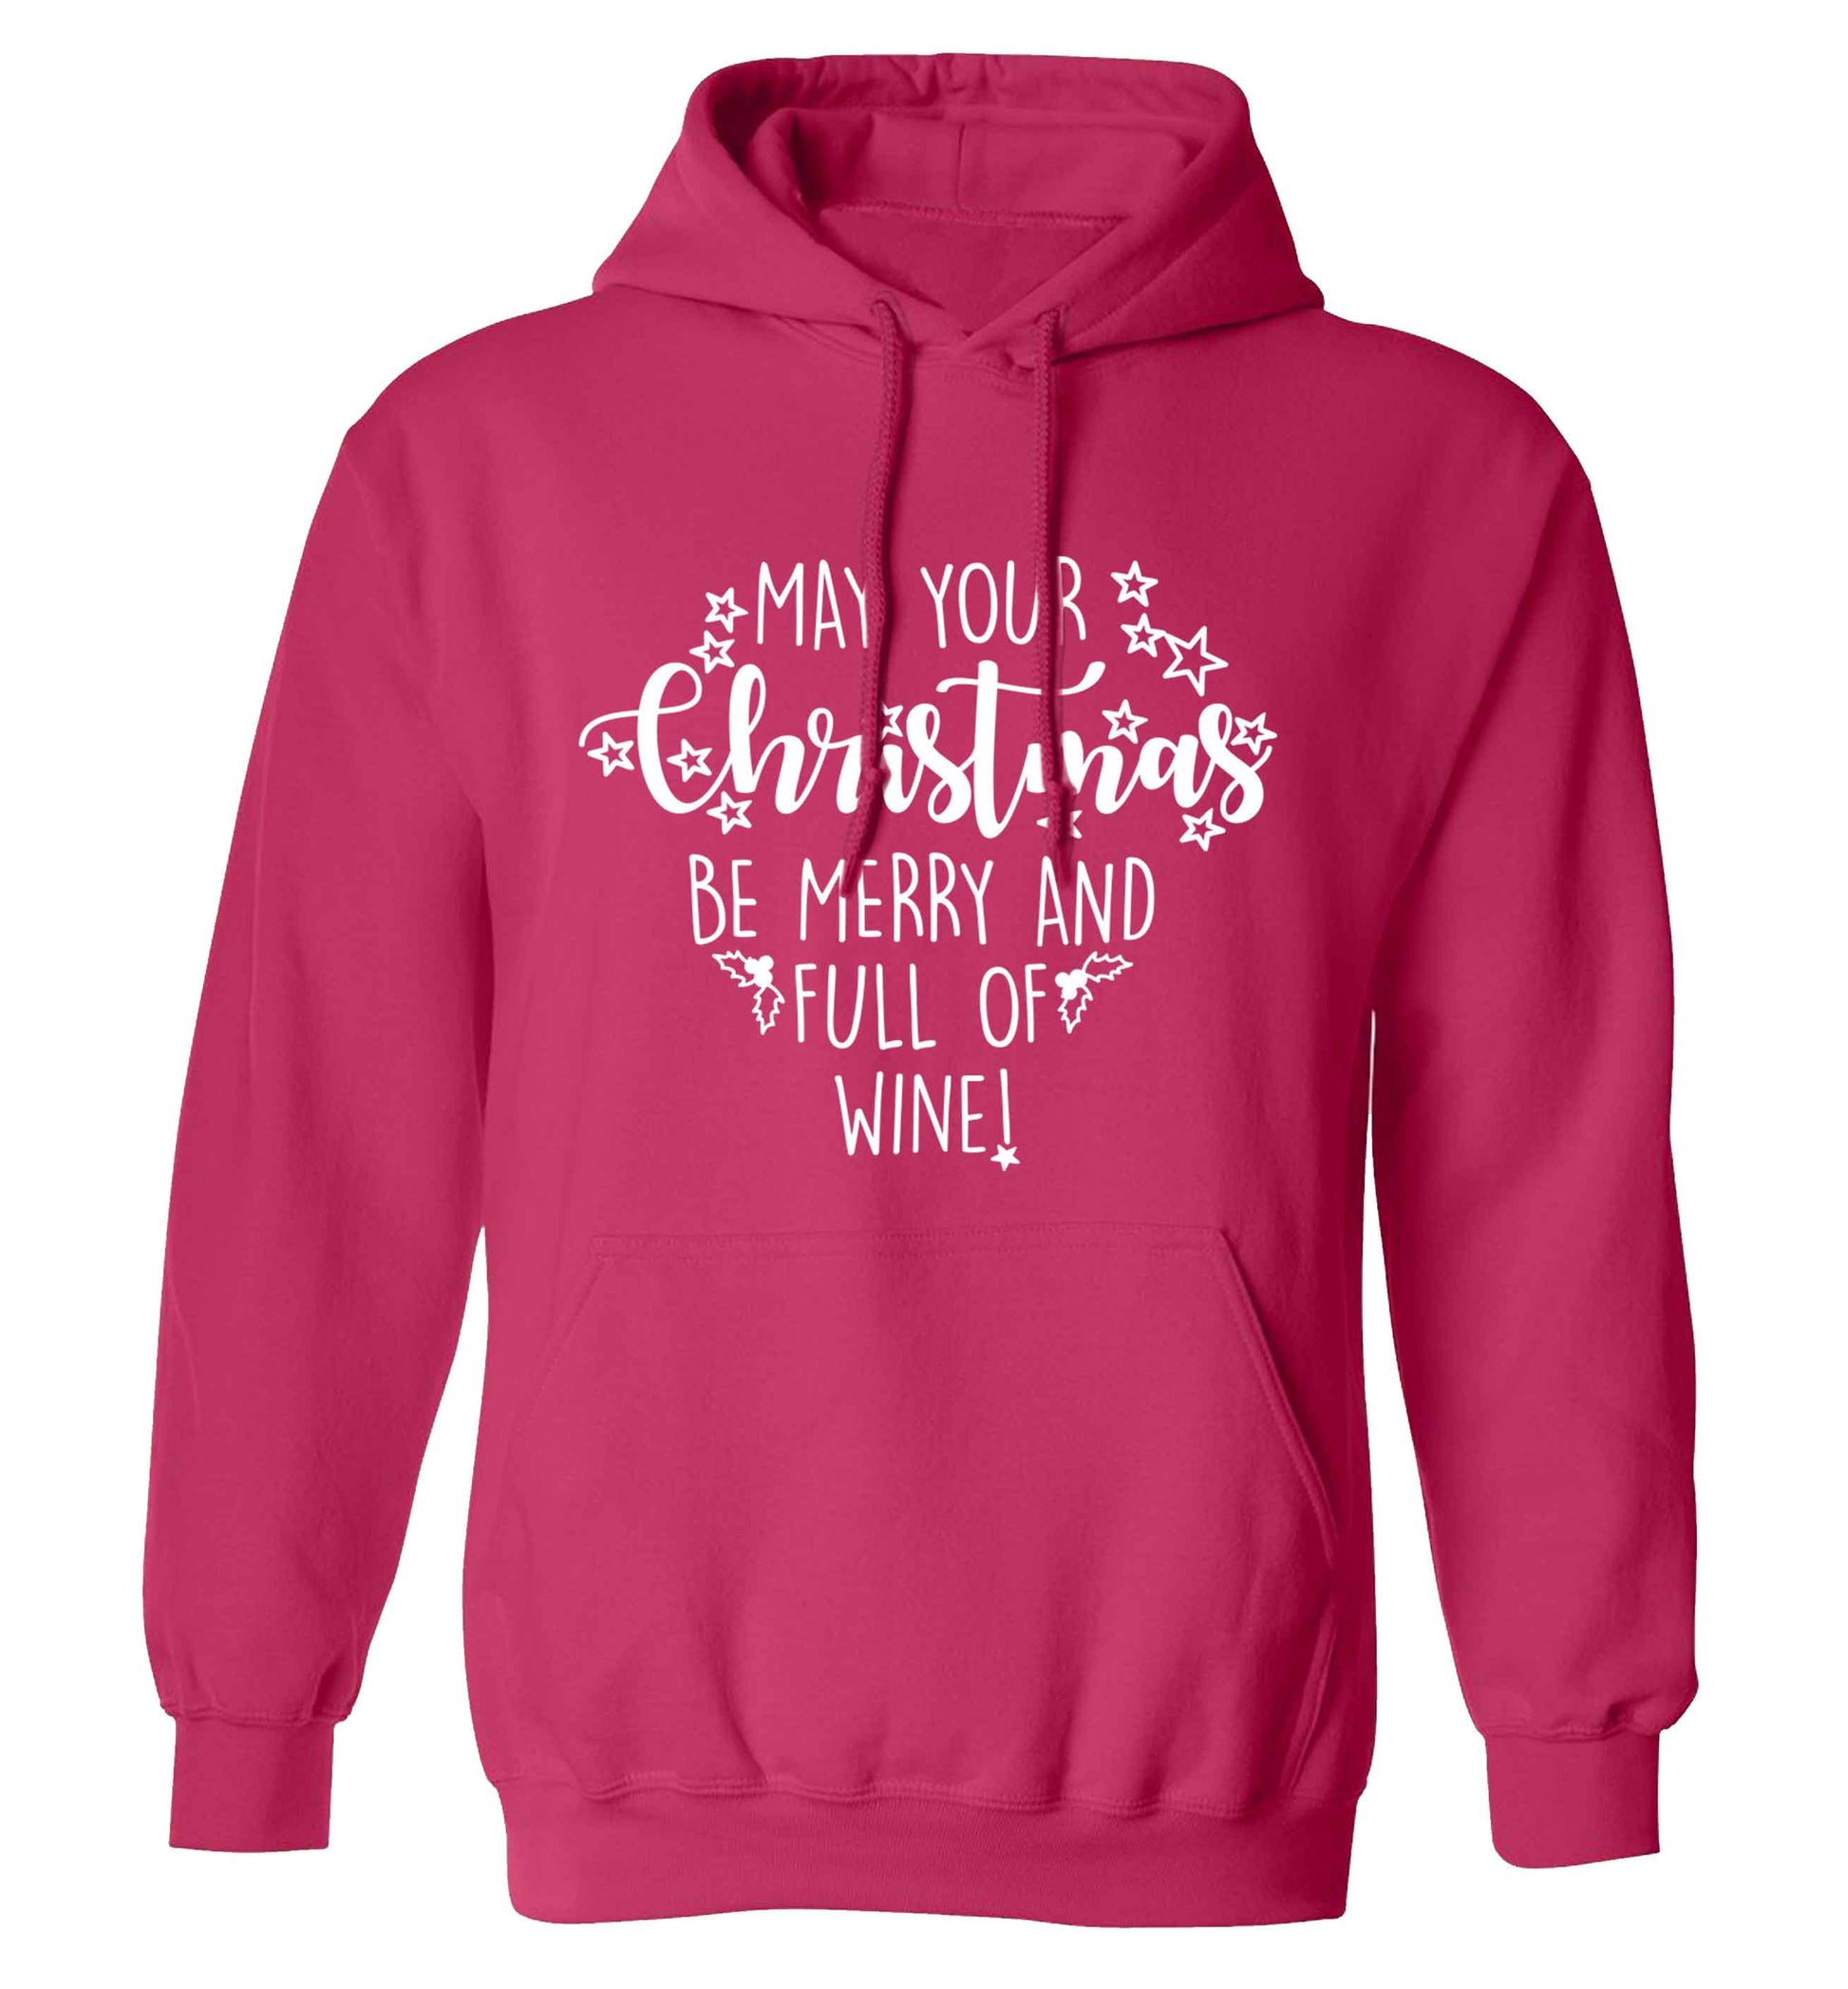 May your Christmas be merry and full of wine adults unisex pink hoodie 2XL